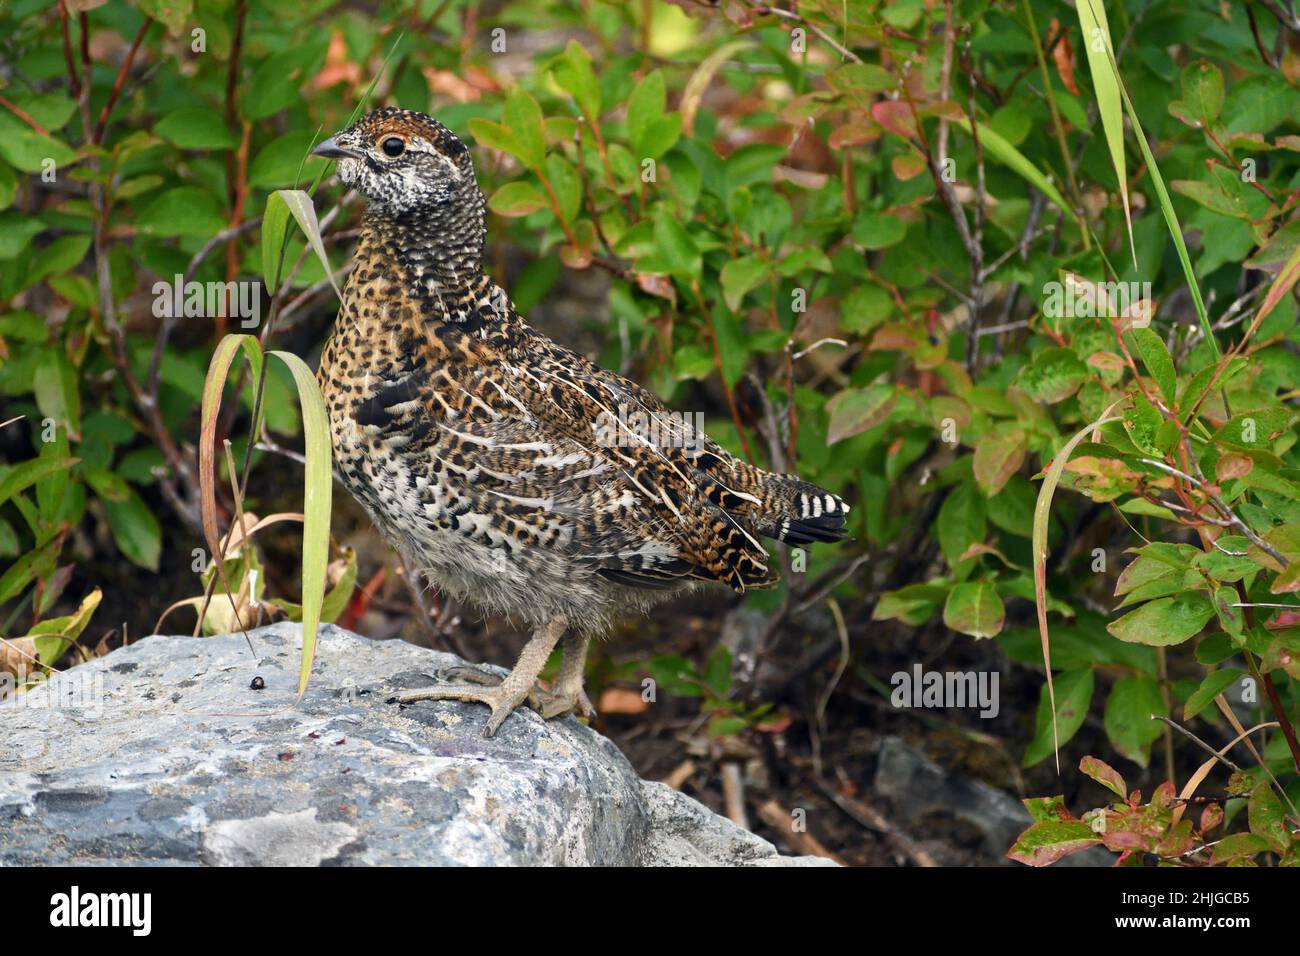 Juvenile spruce grouse foraging on huckleberries in late summer. Kootenai National Forest, Montana. (Photo by Randy Beacham) Stock Photo